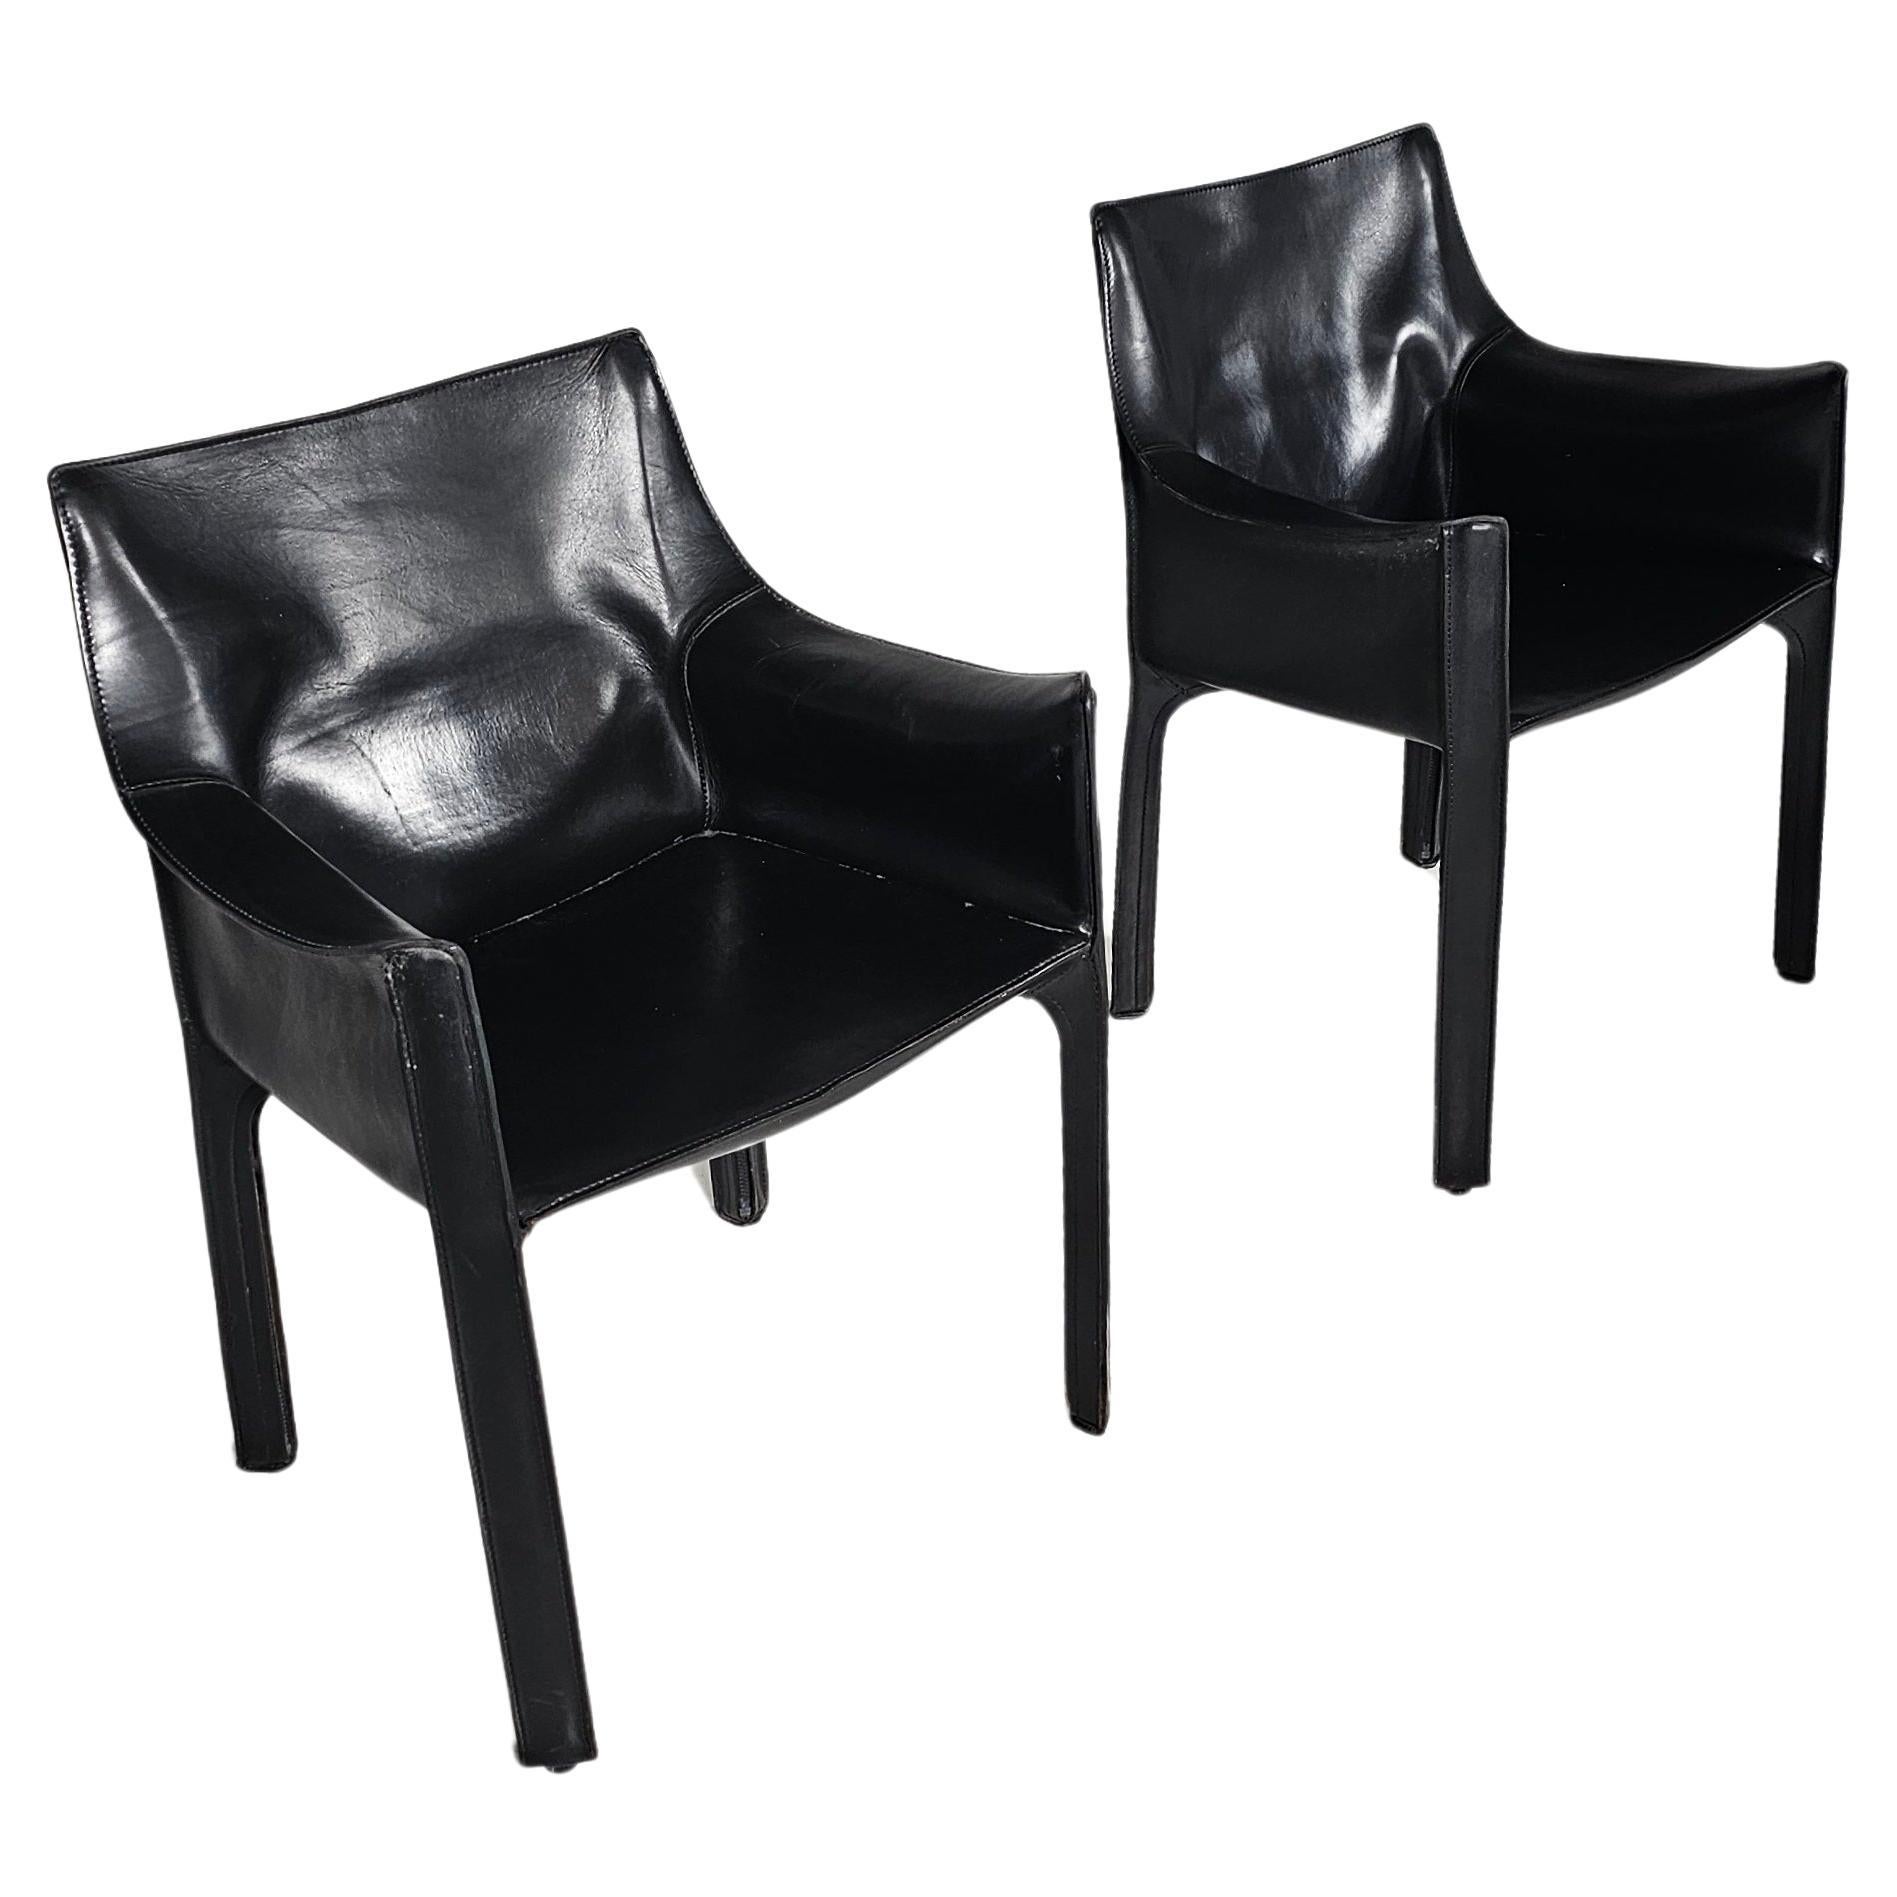 Set of two black leather Cab 413 Chairs by Mario Bellini for Cassina